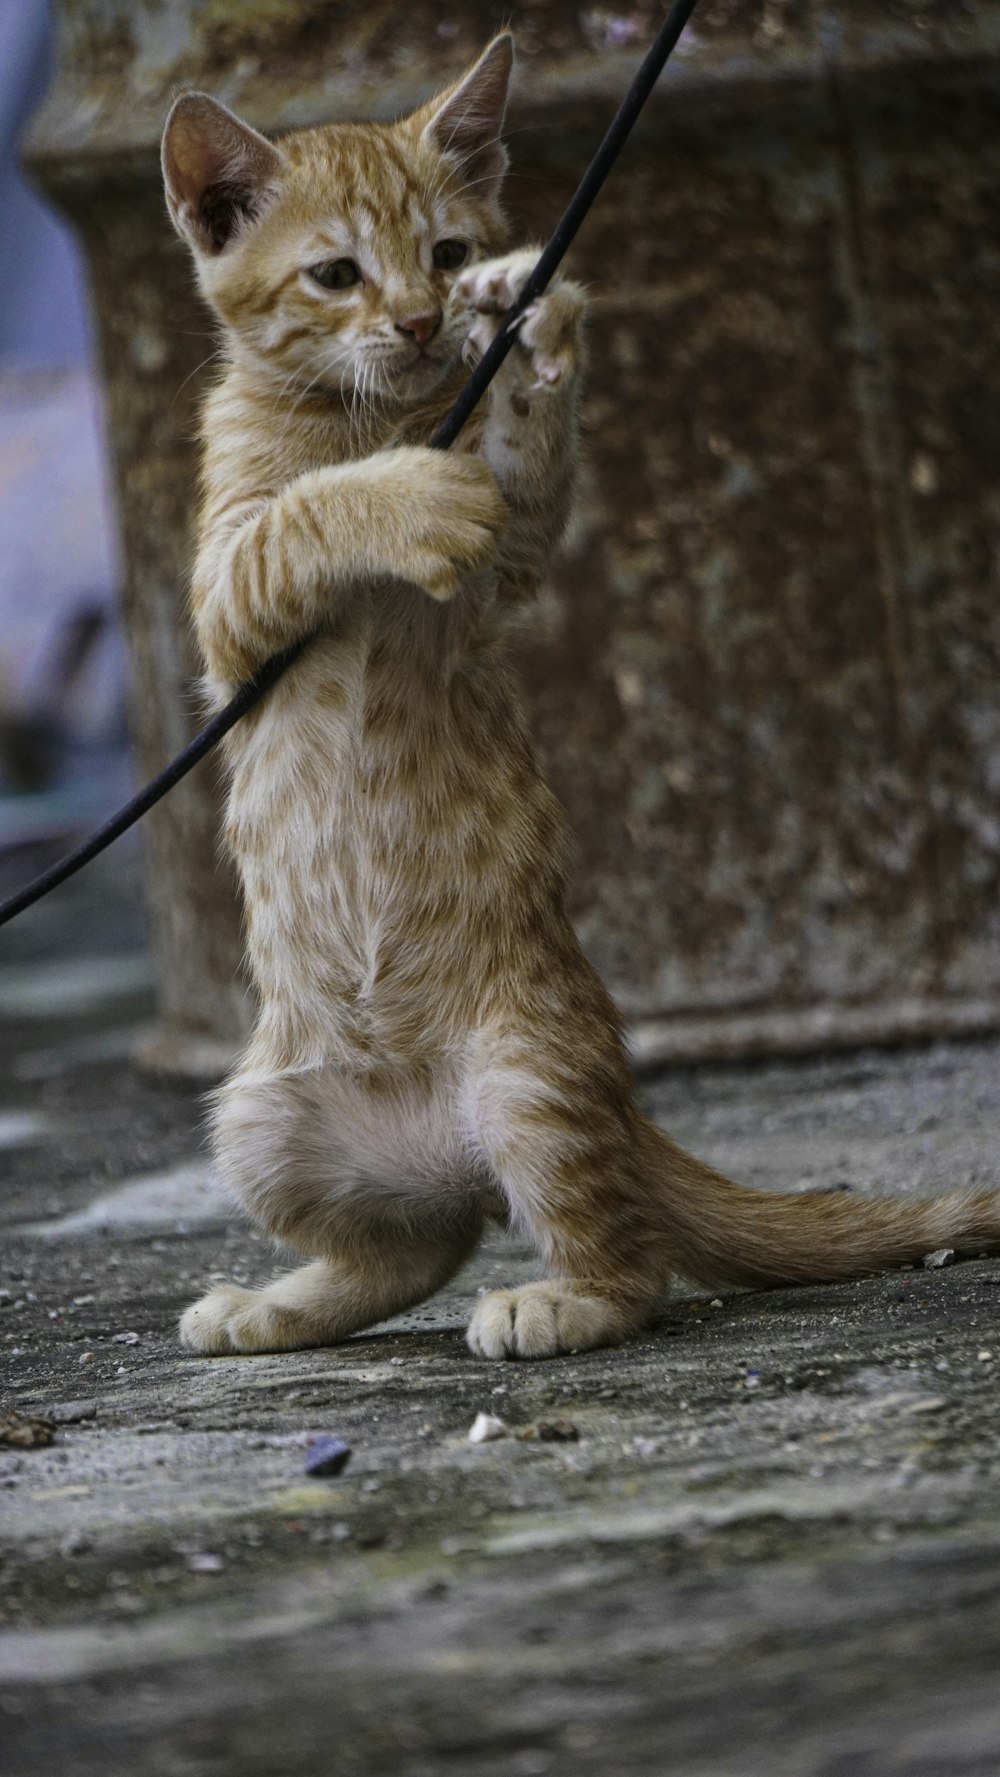 a cat holding a fishing pole